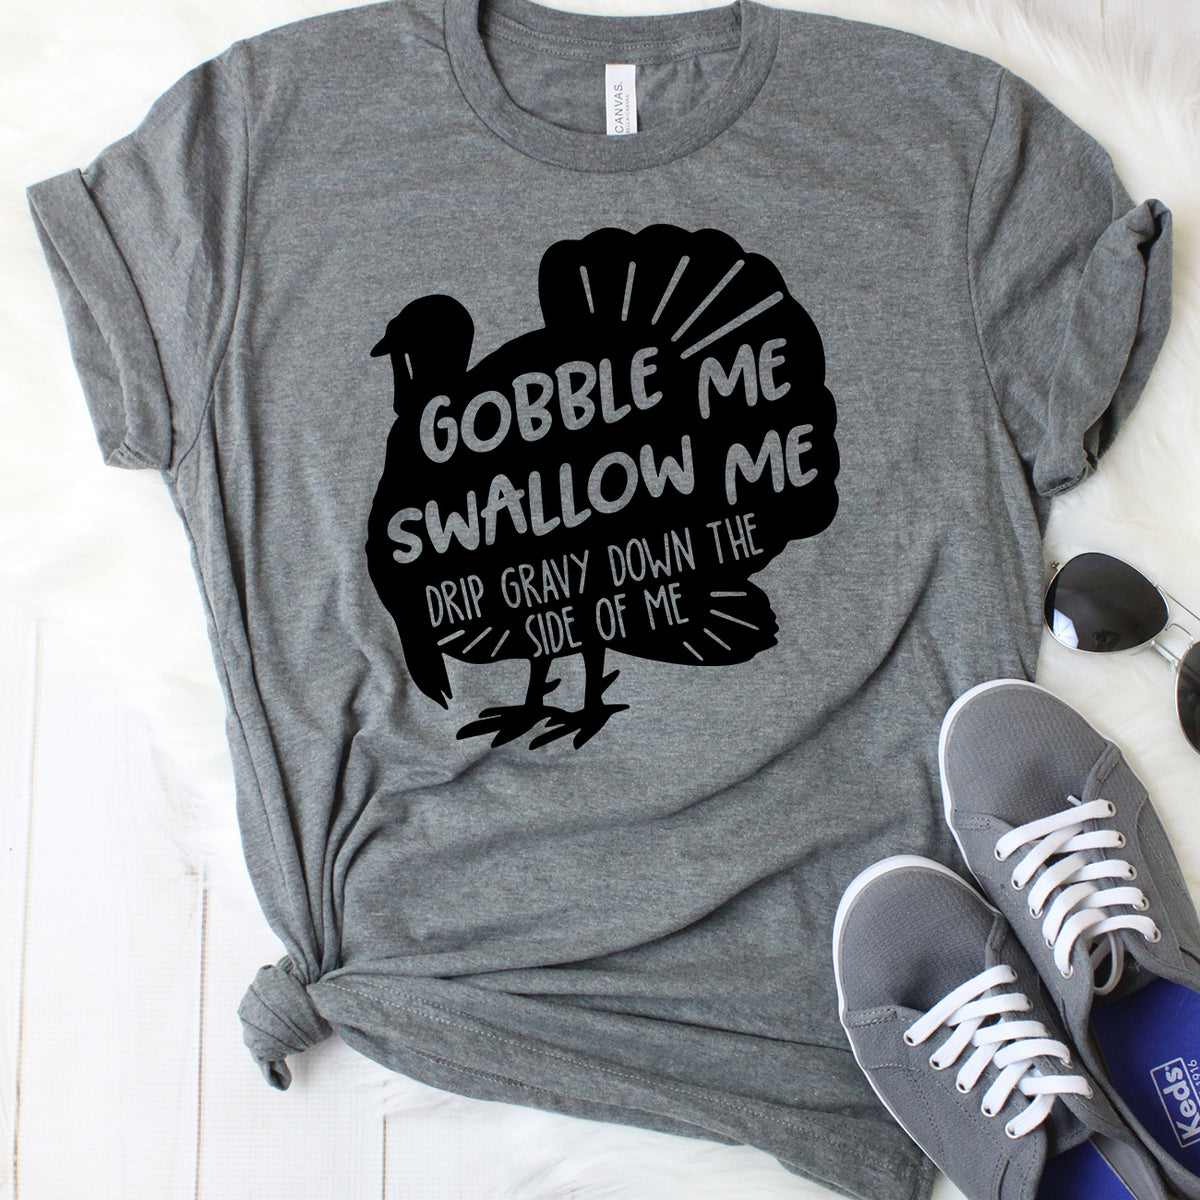 Gobble Me Swallow Me Drip Gravy Down The Side of Me T-Shirt